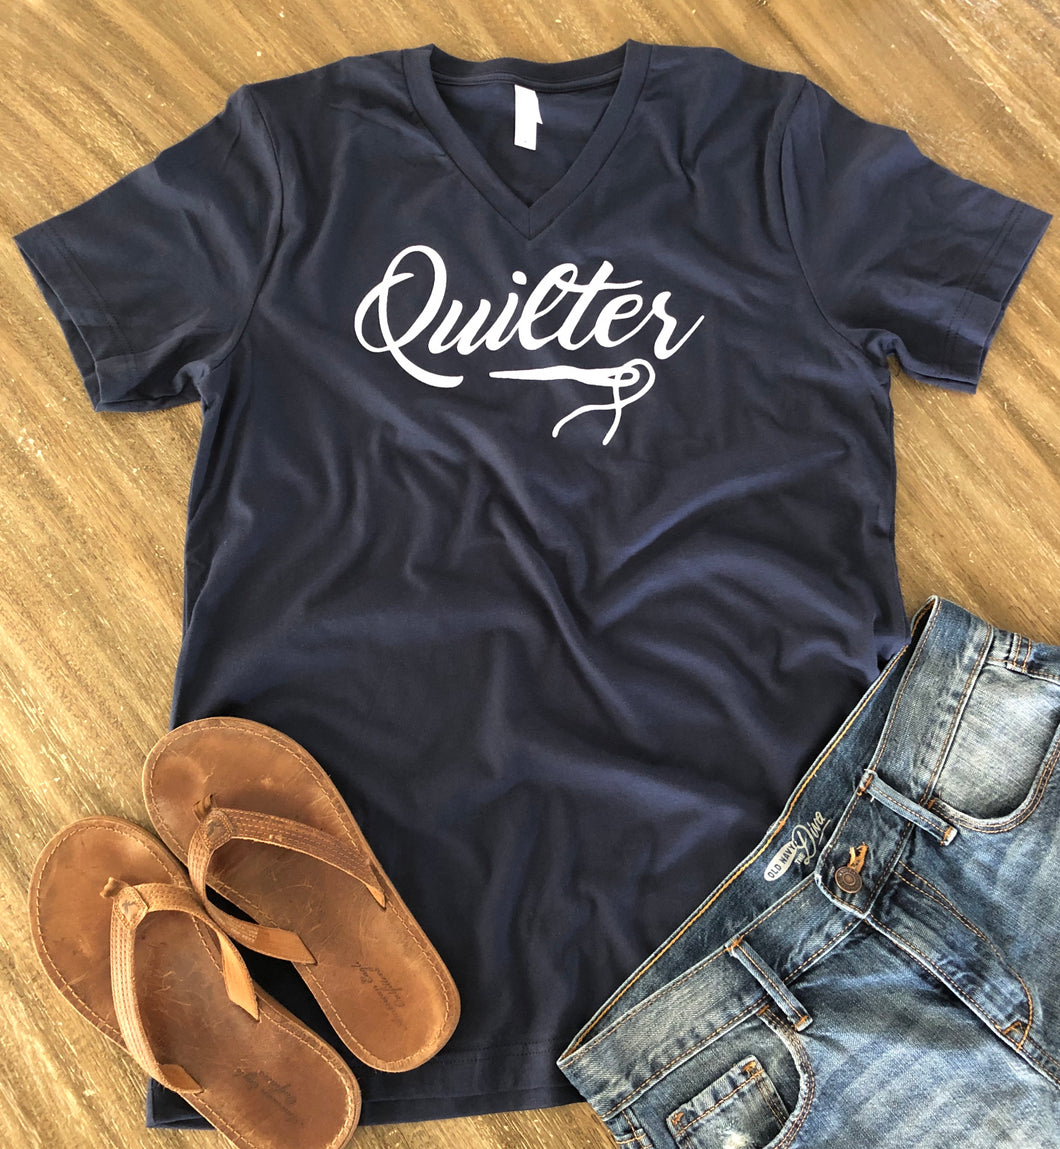 Quilter V-Neck Tee Shirt Navy Blue-Small Only